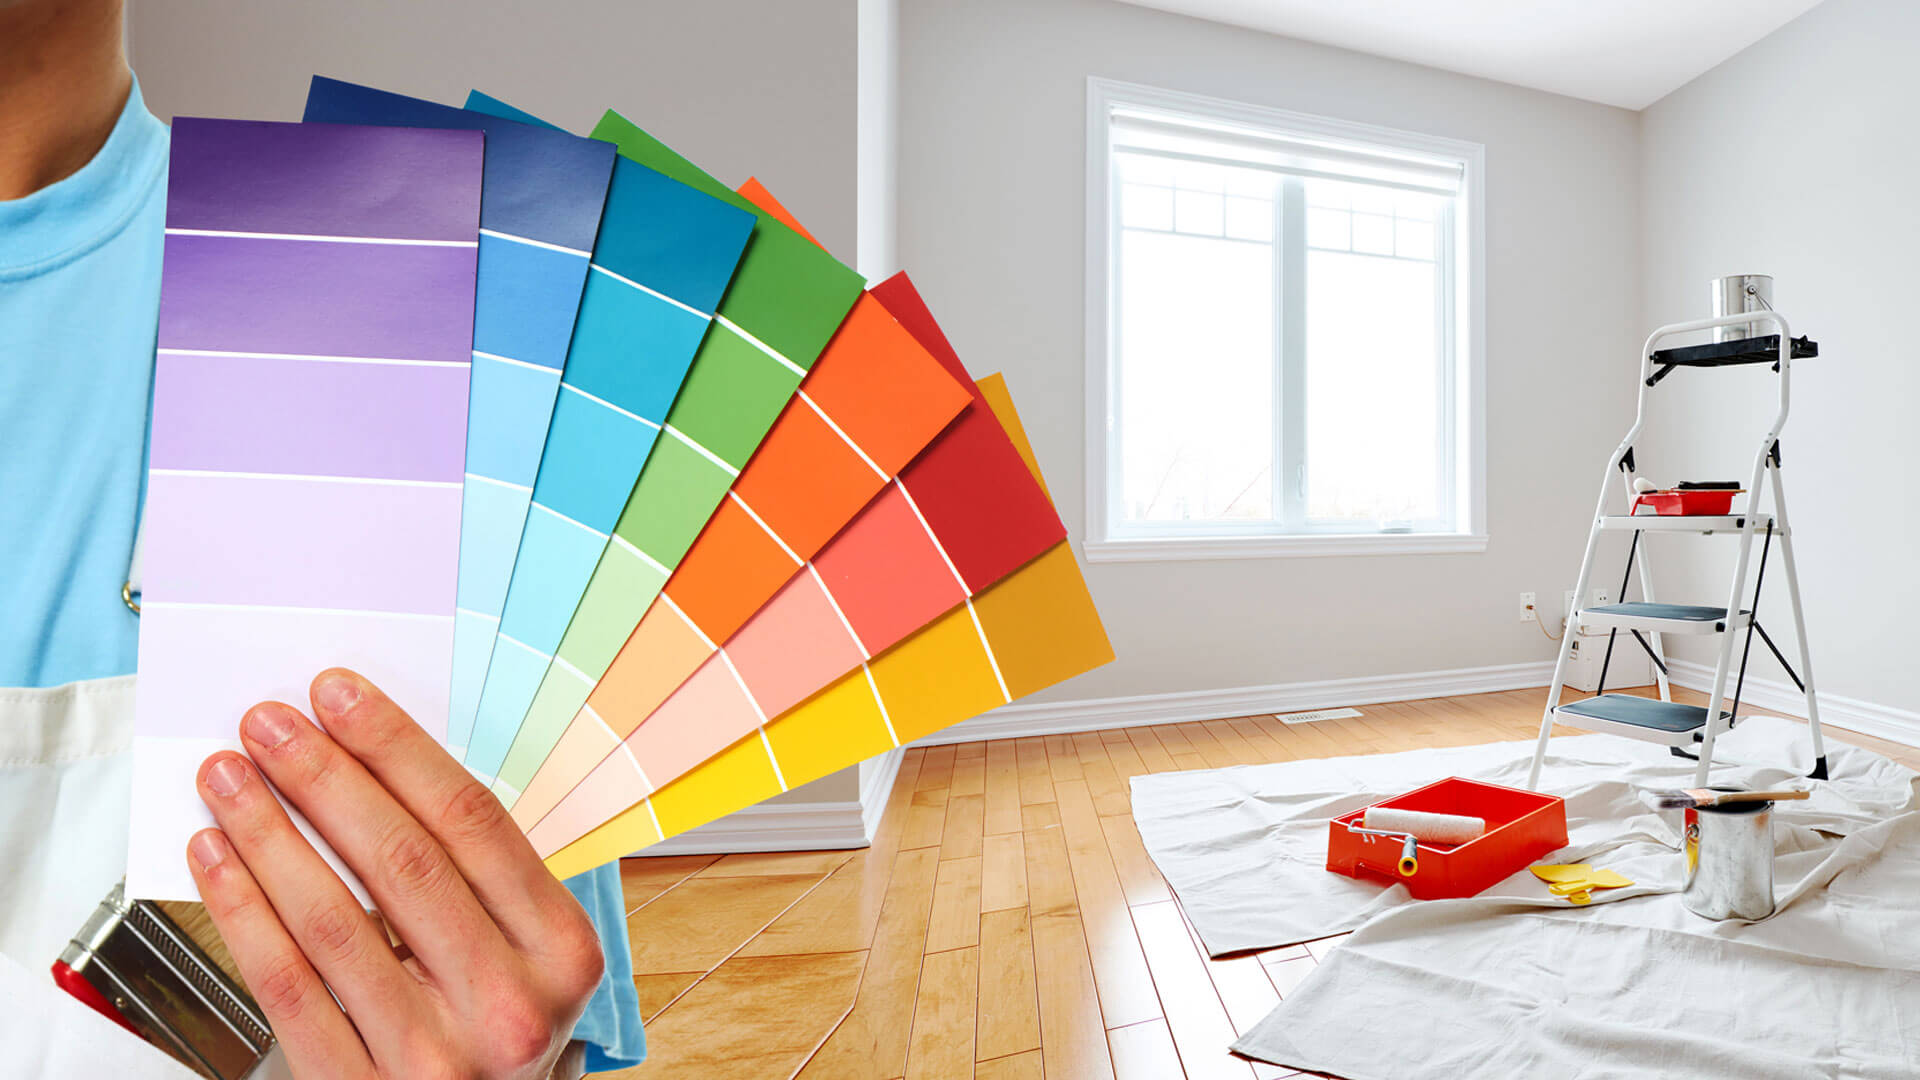 Cold Lake Painting Contractor, Painting Company and Painter